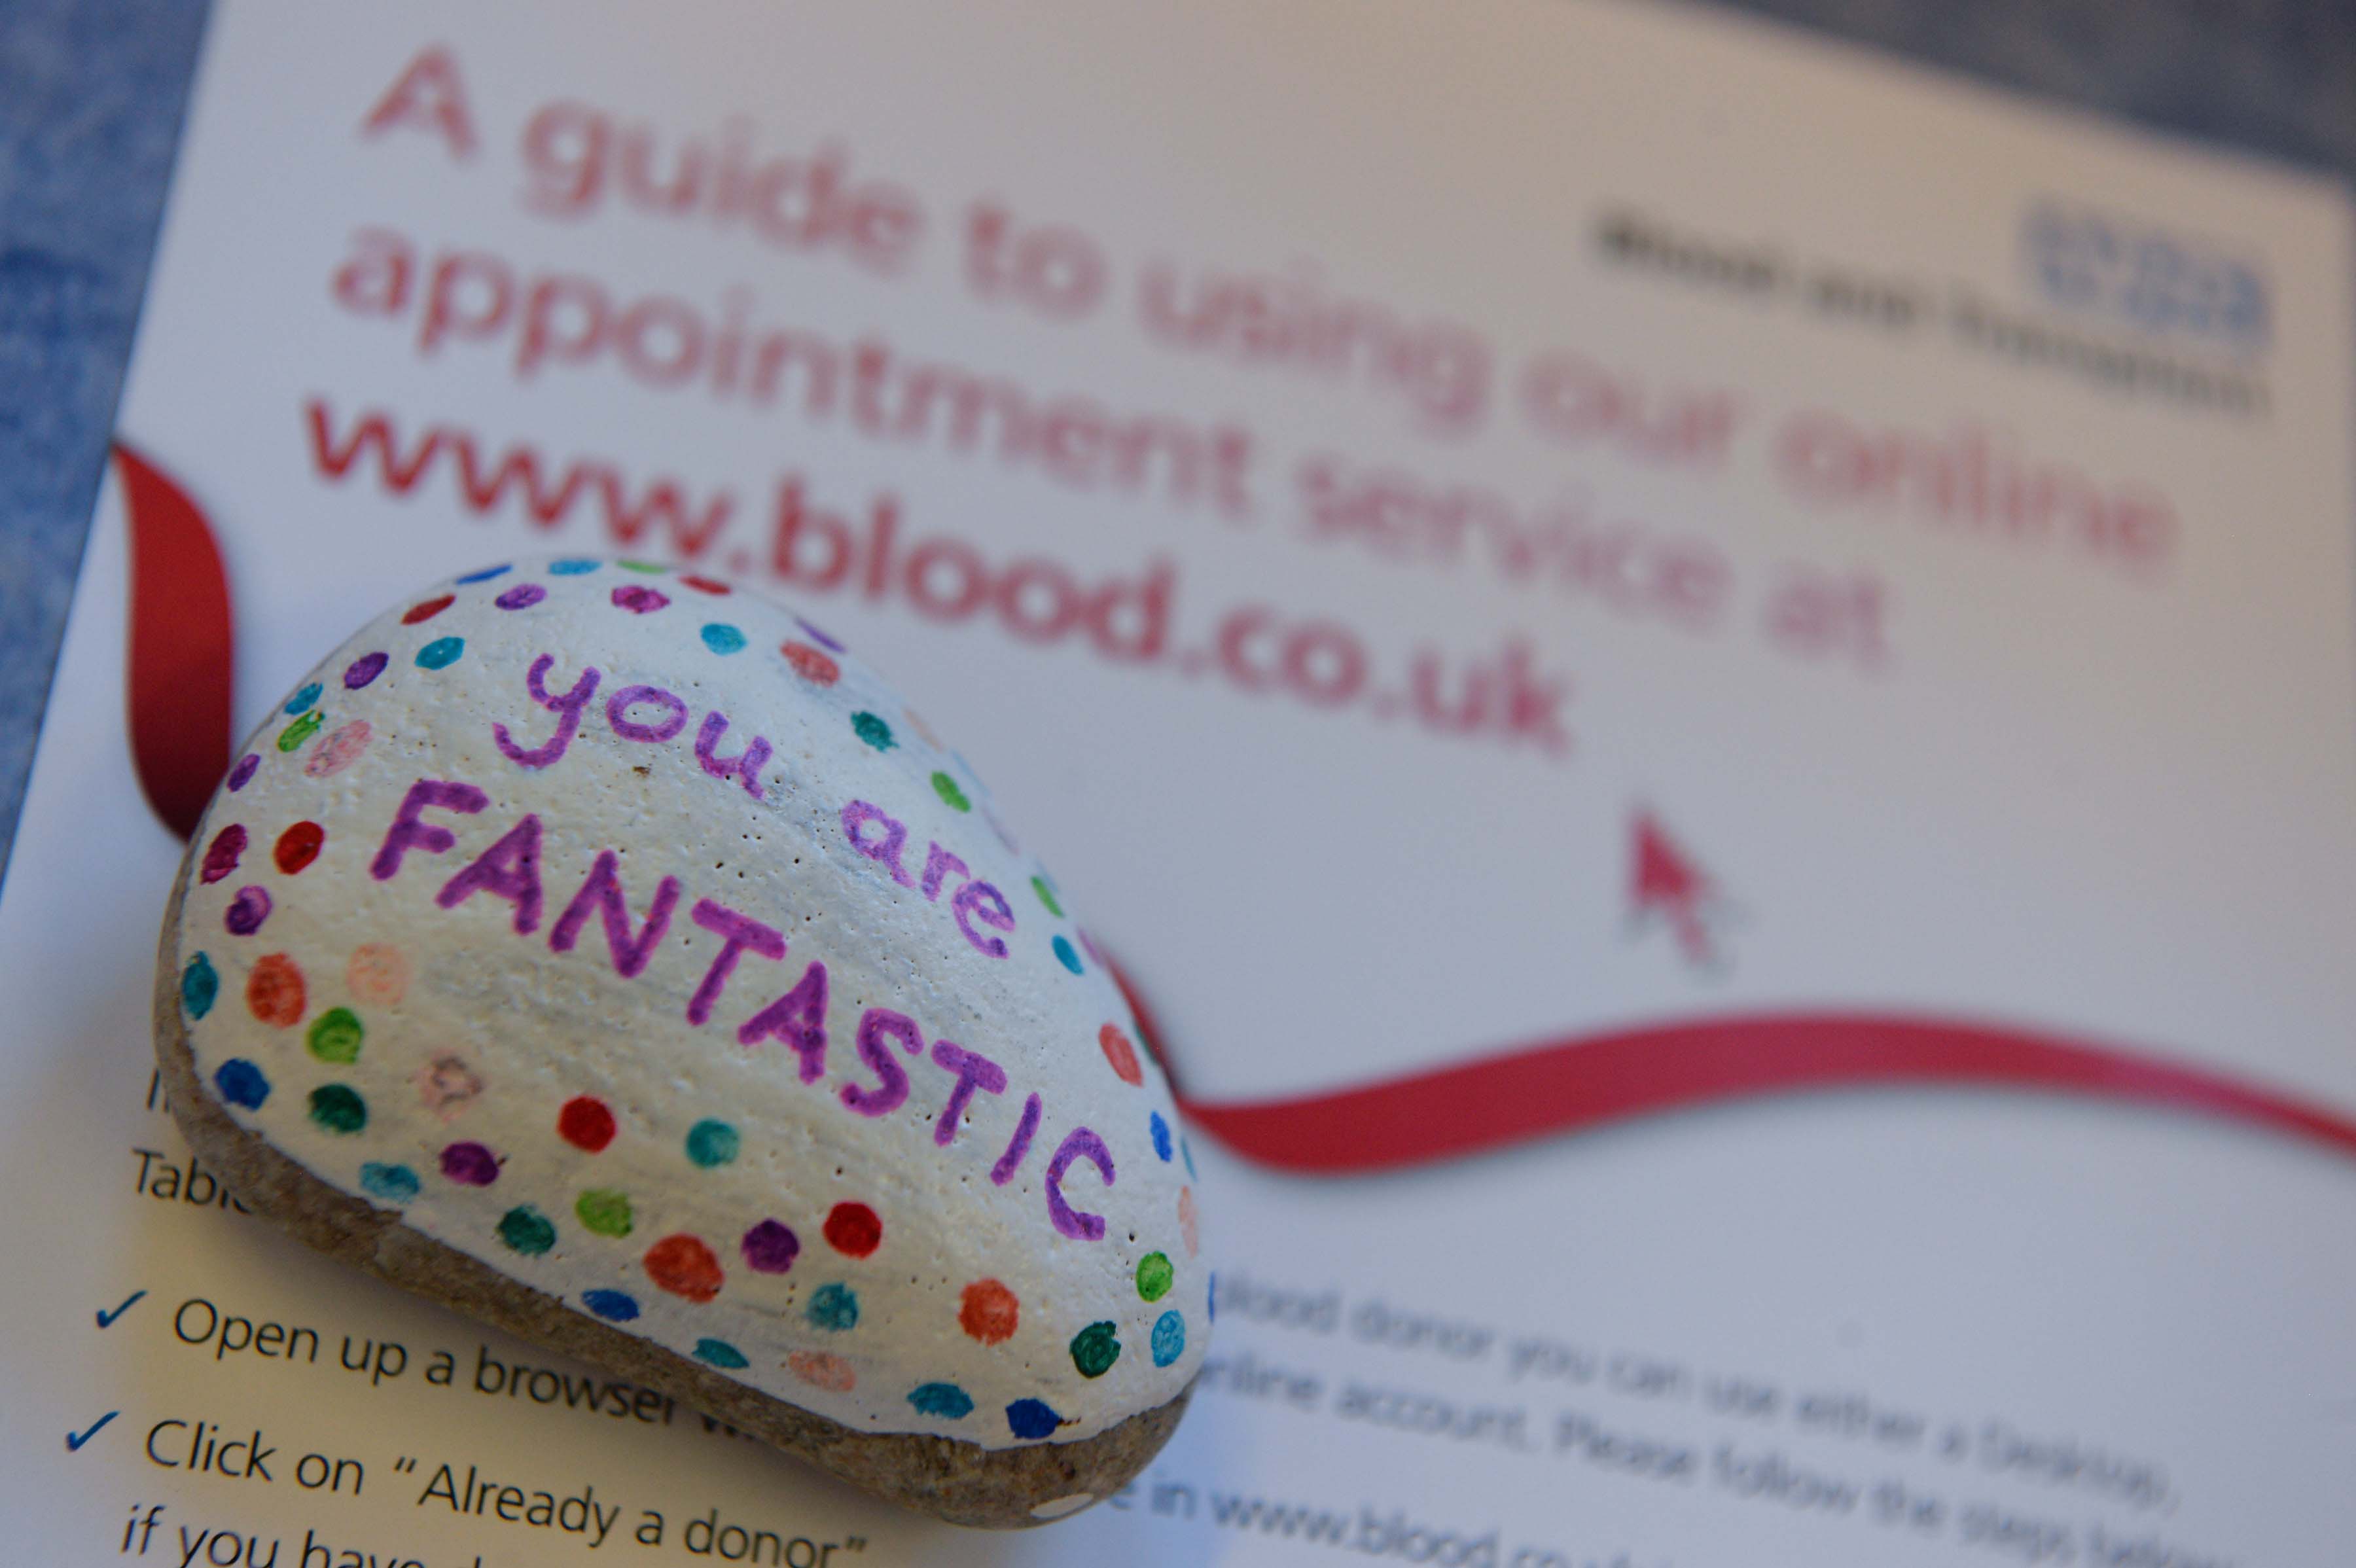 A paperweight sits on top of a guide to using the online blood service